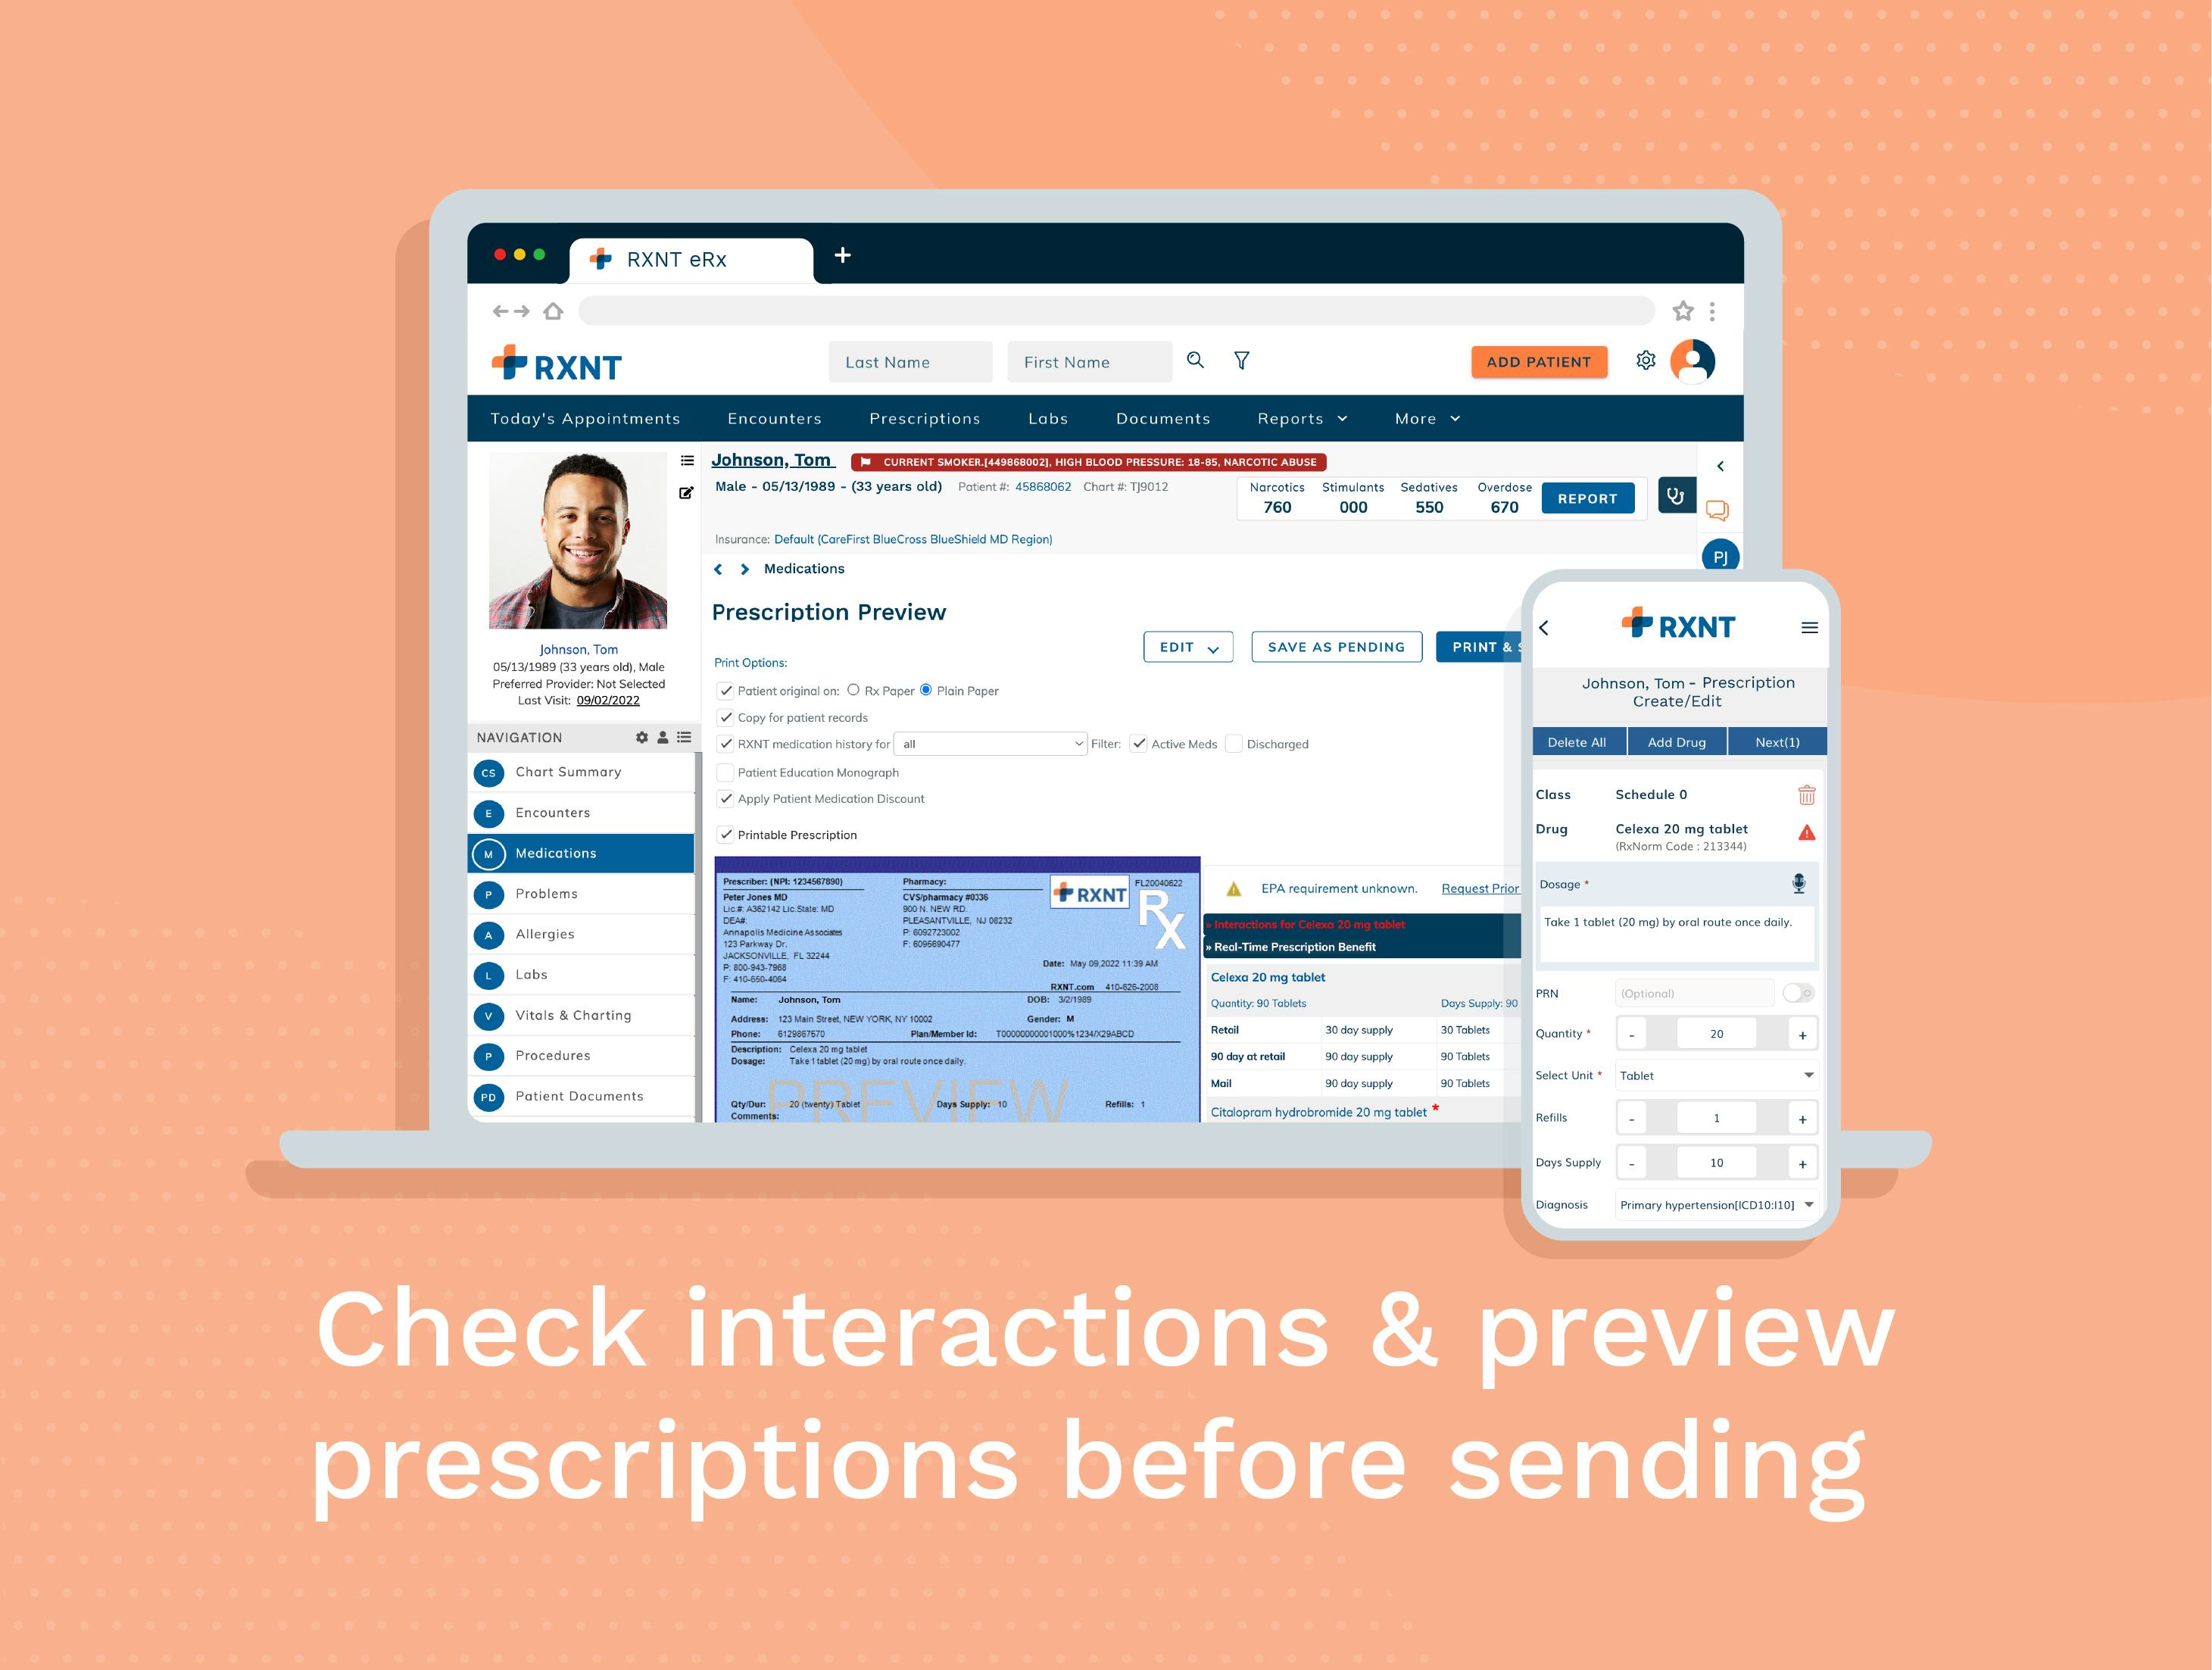 RXNT Software - RXNT E-Prescribing (ERX) Software. Manage Electronic Prior Authorizations (ePA) and Real-Time Prescription Benefit (RTPB) at a glance. Check interactions & preview your prescriptions before sending. Available for desktop, tablet, & mobile (iOS & Android).